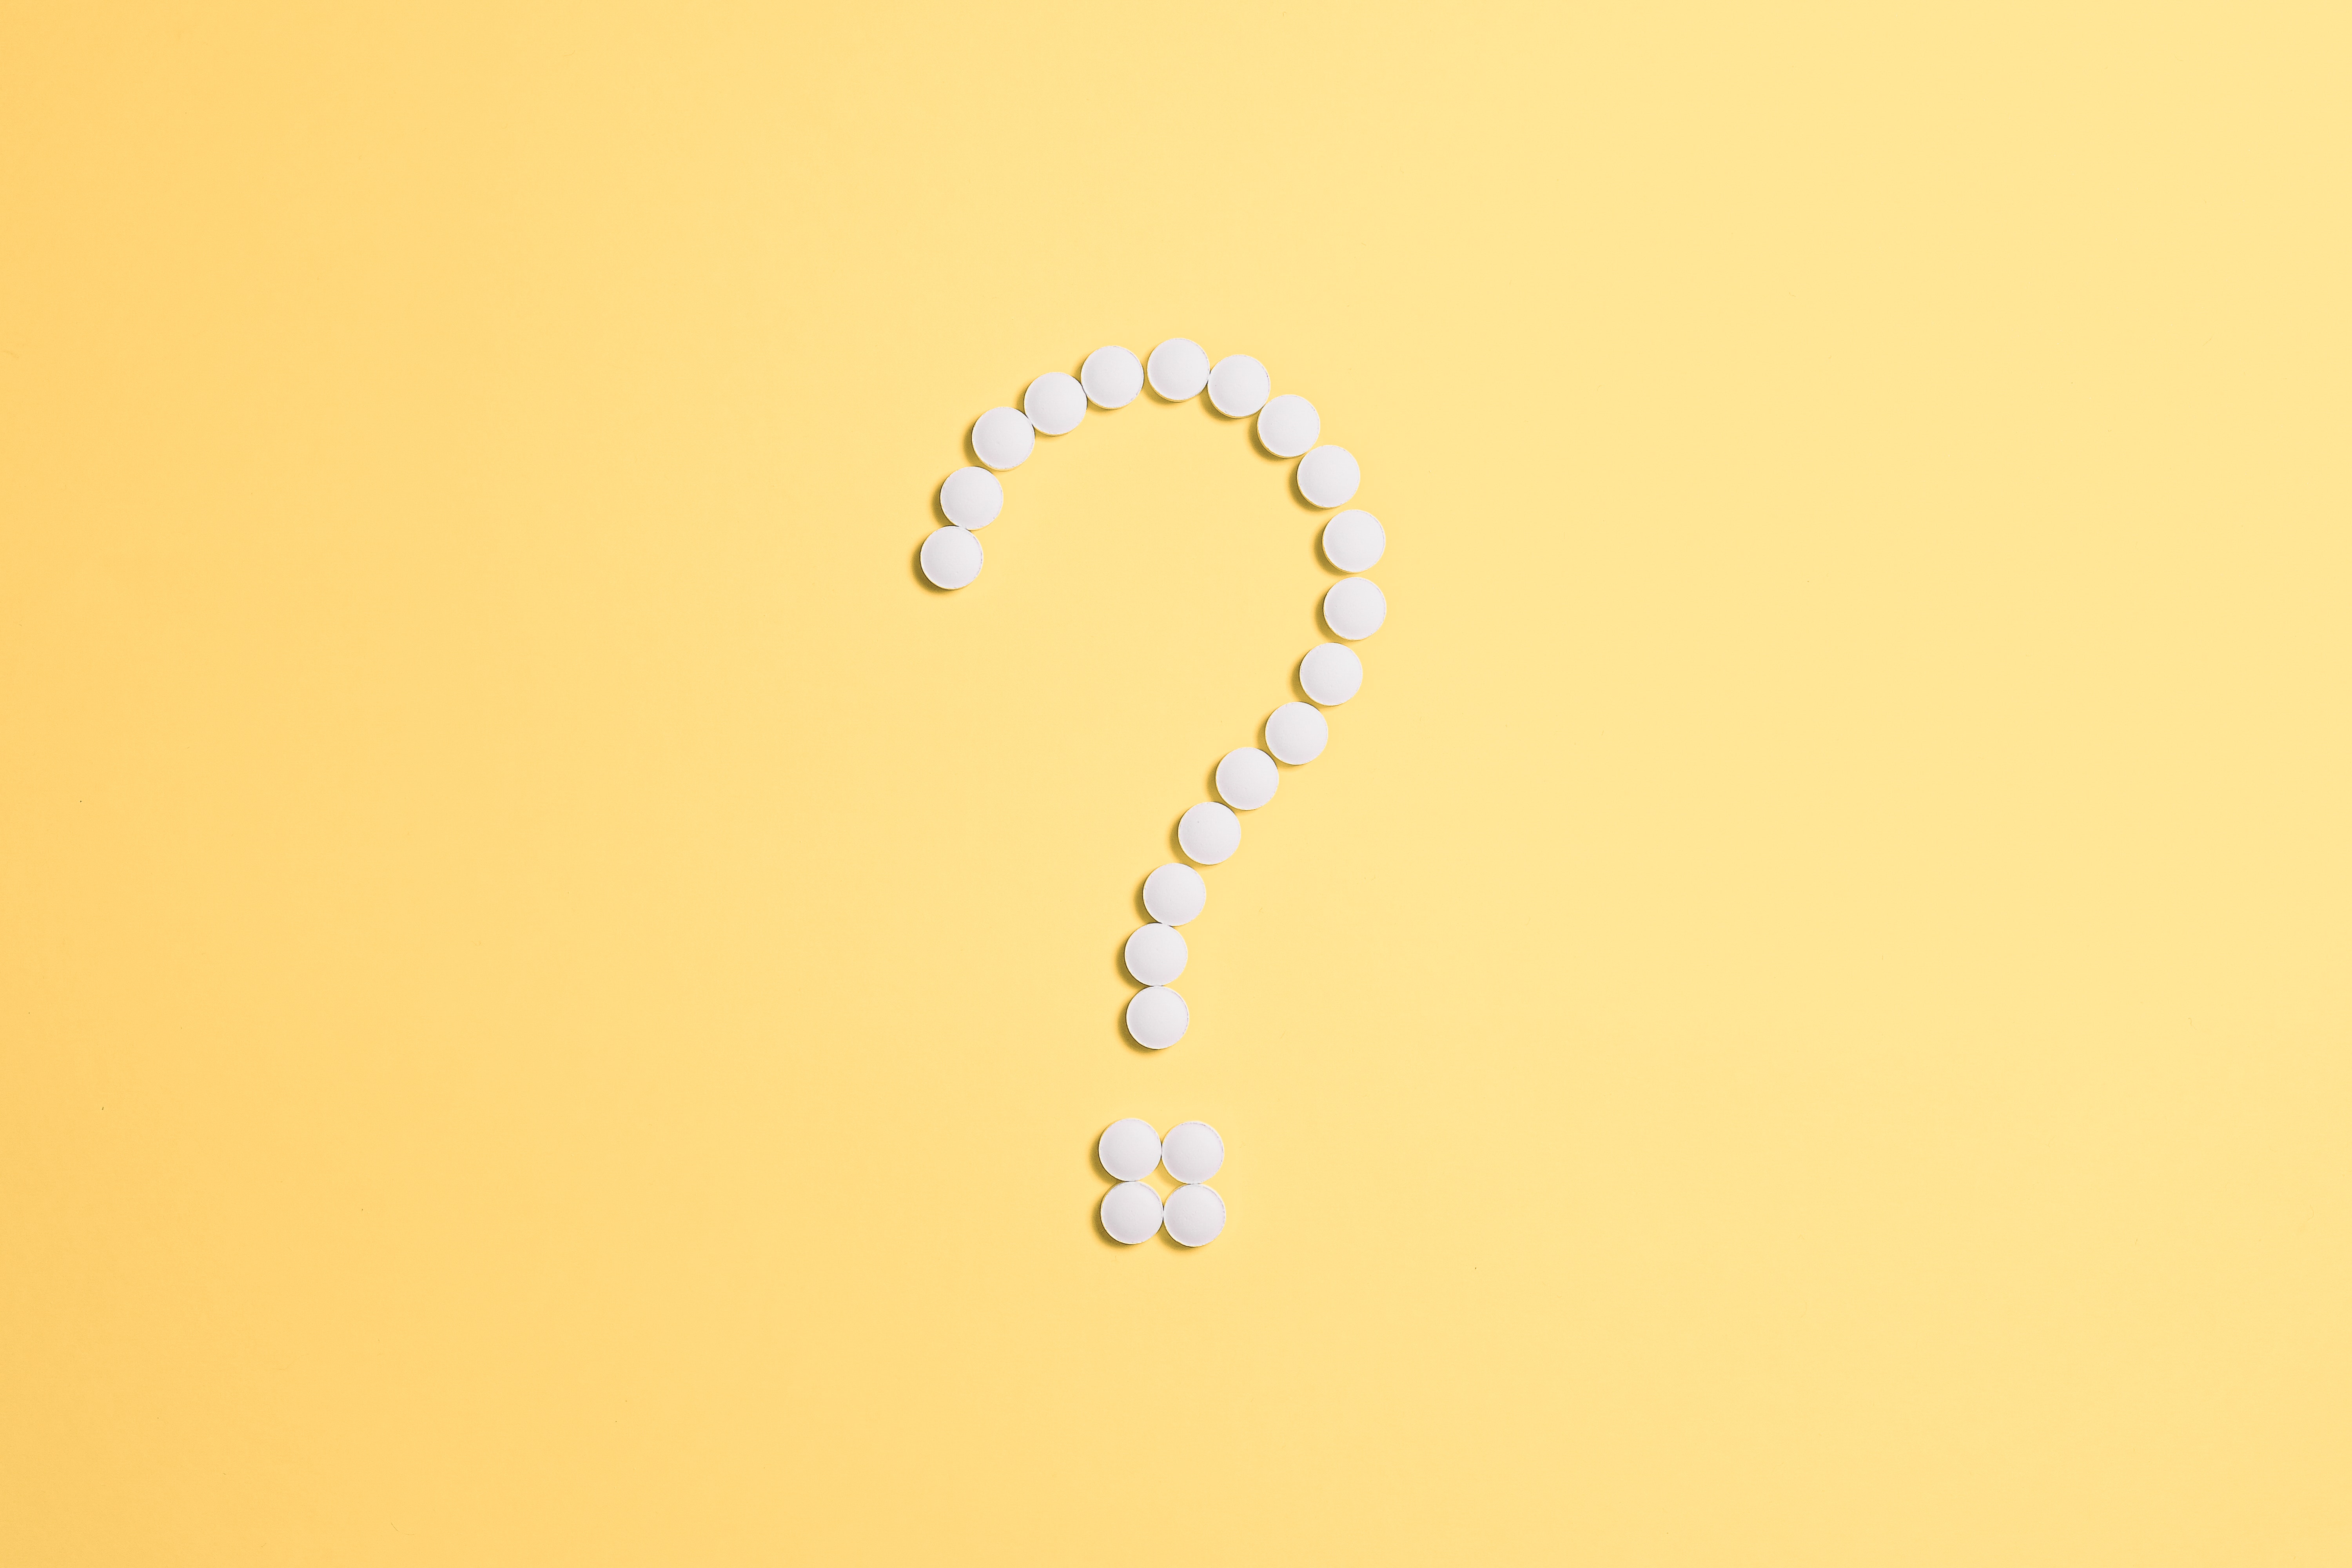 Pills in the shape of a question mark. Image courtesy of Anna Schvets via Pexels